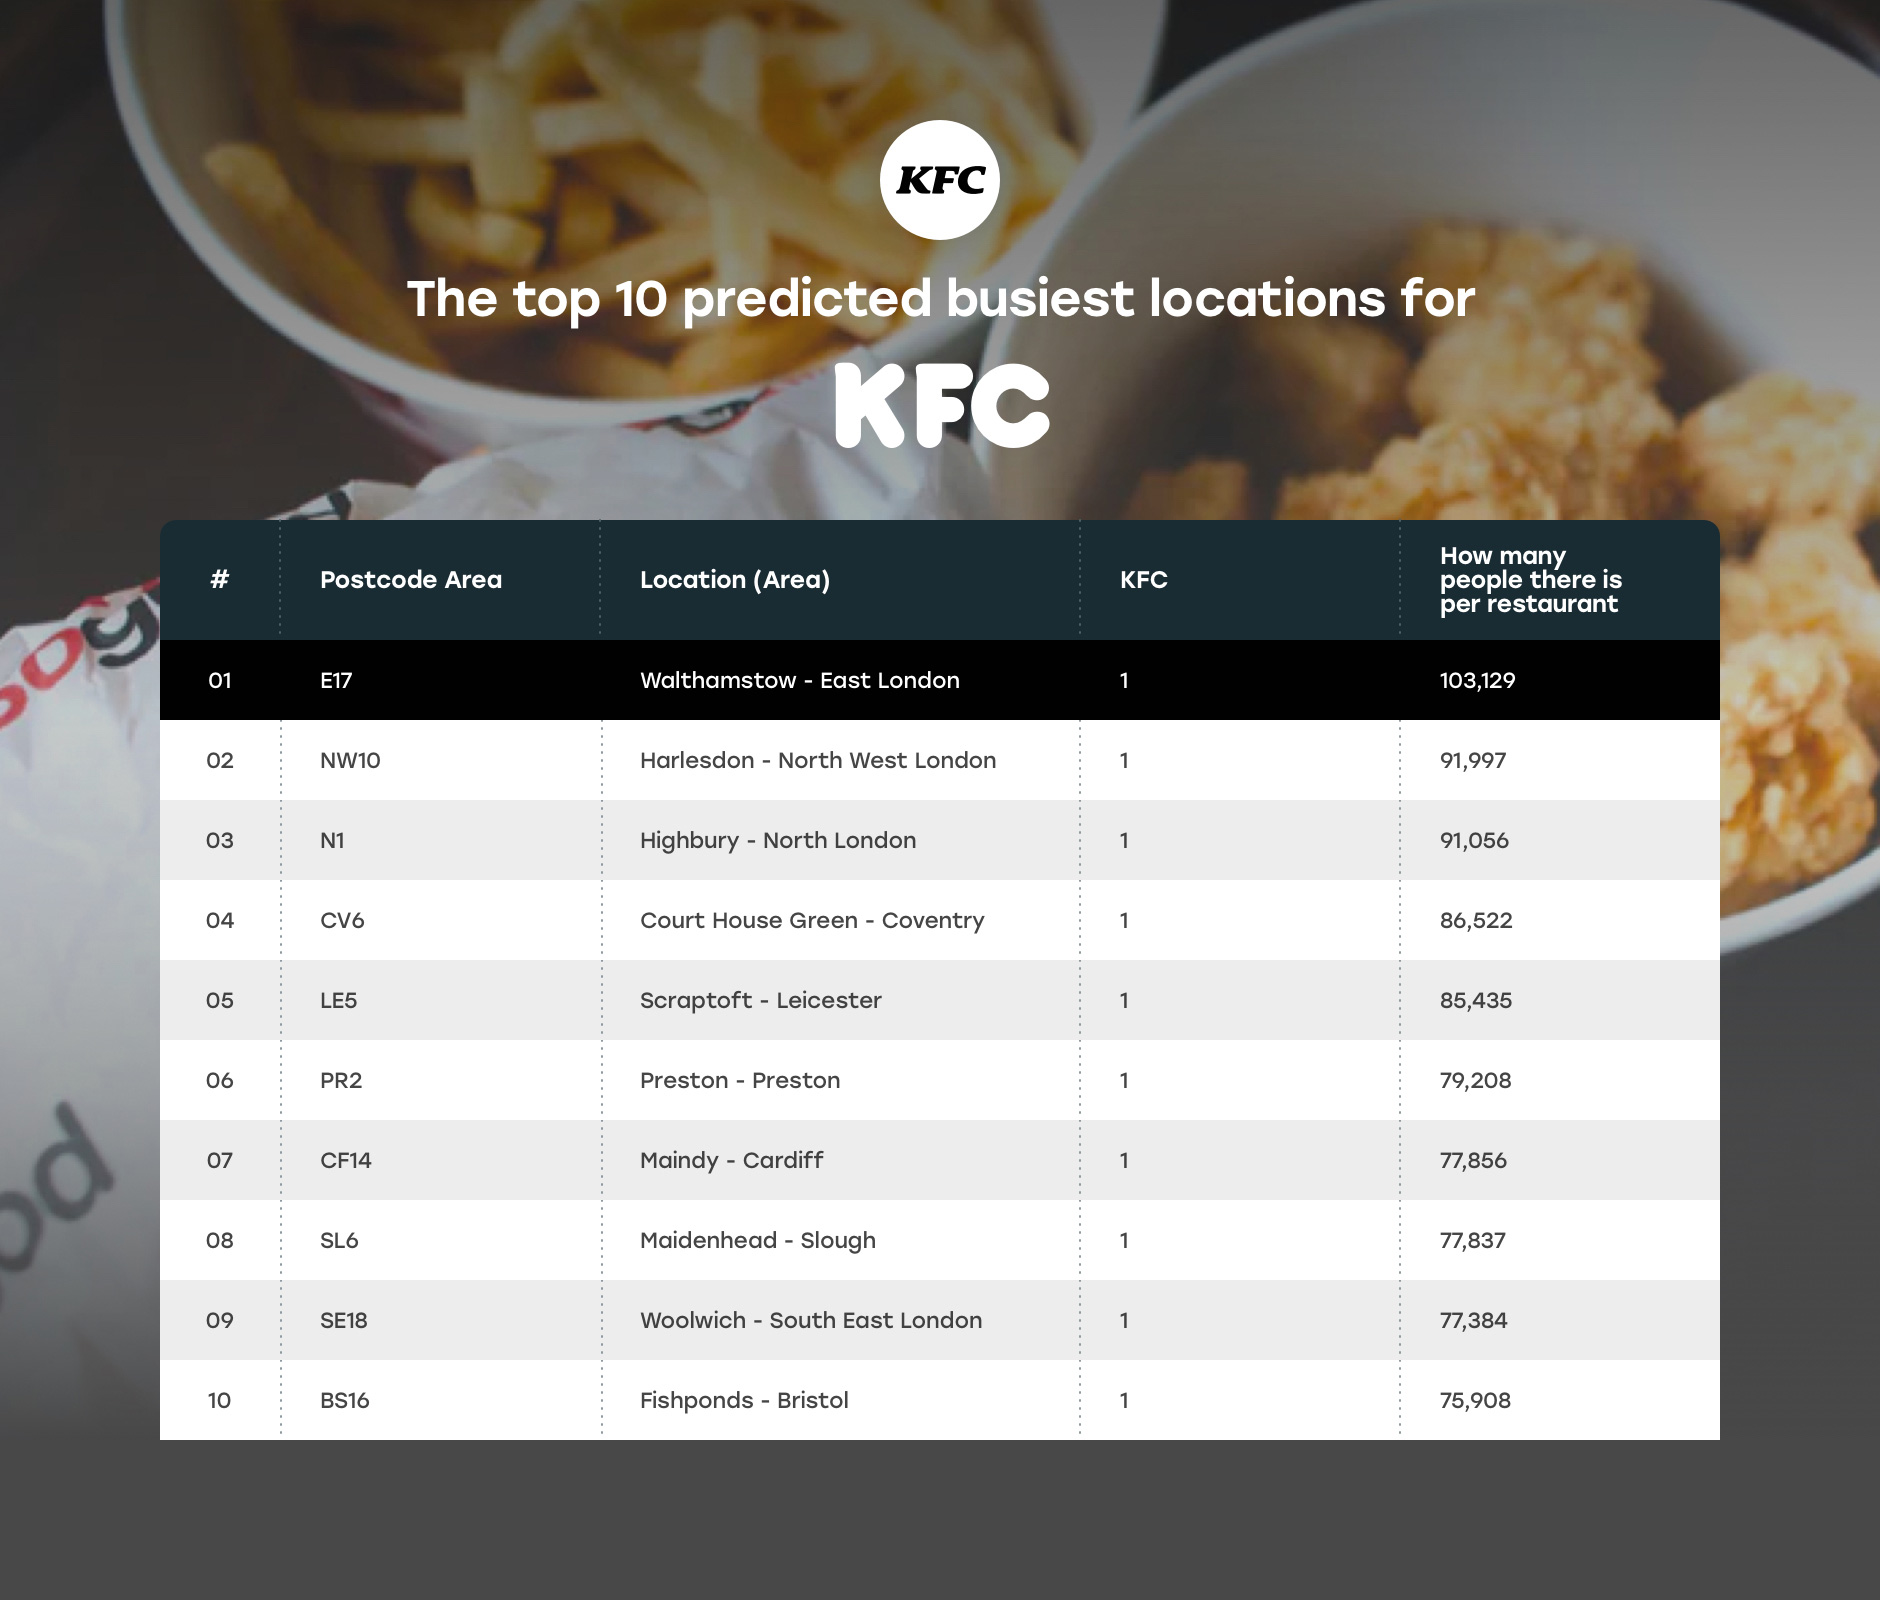 The top 10 predicted busiest locations for KFC